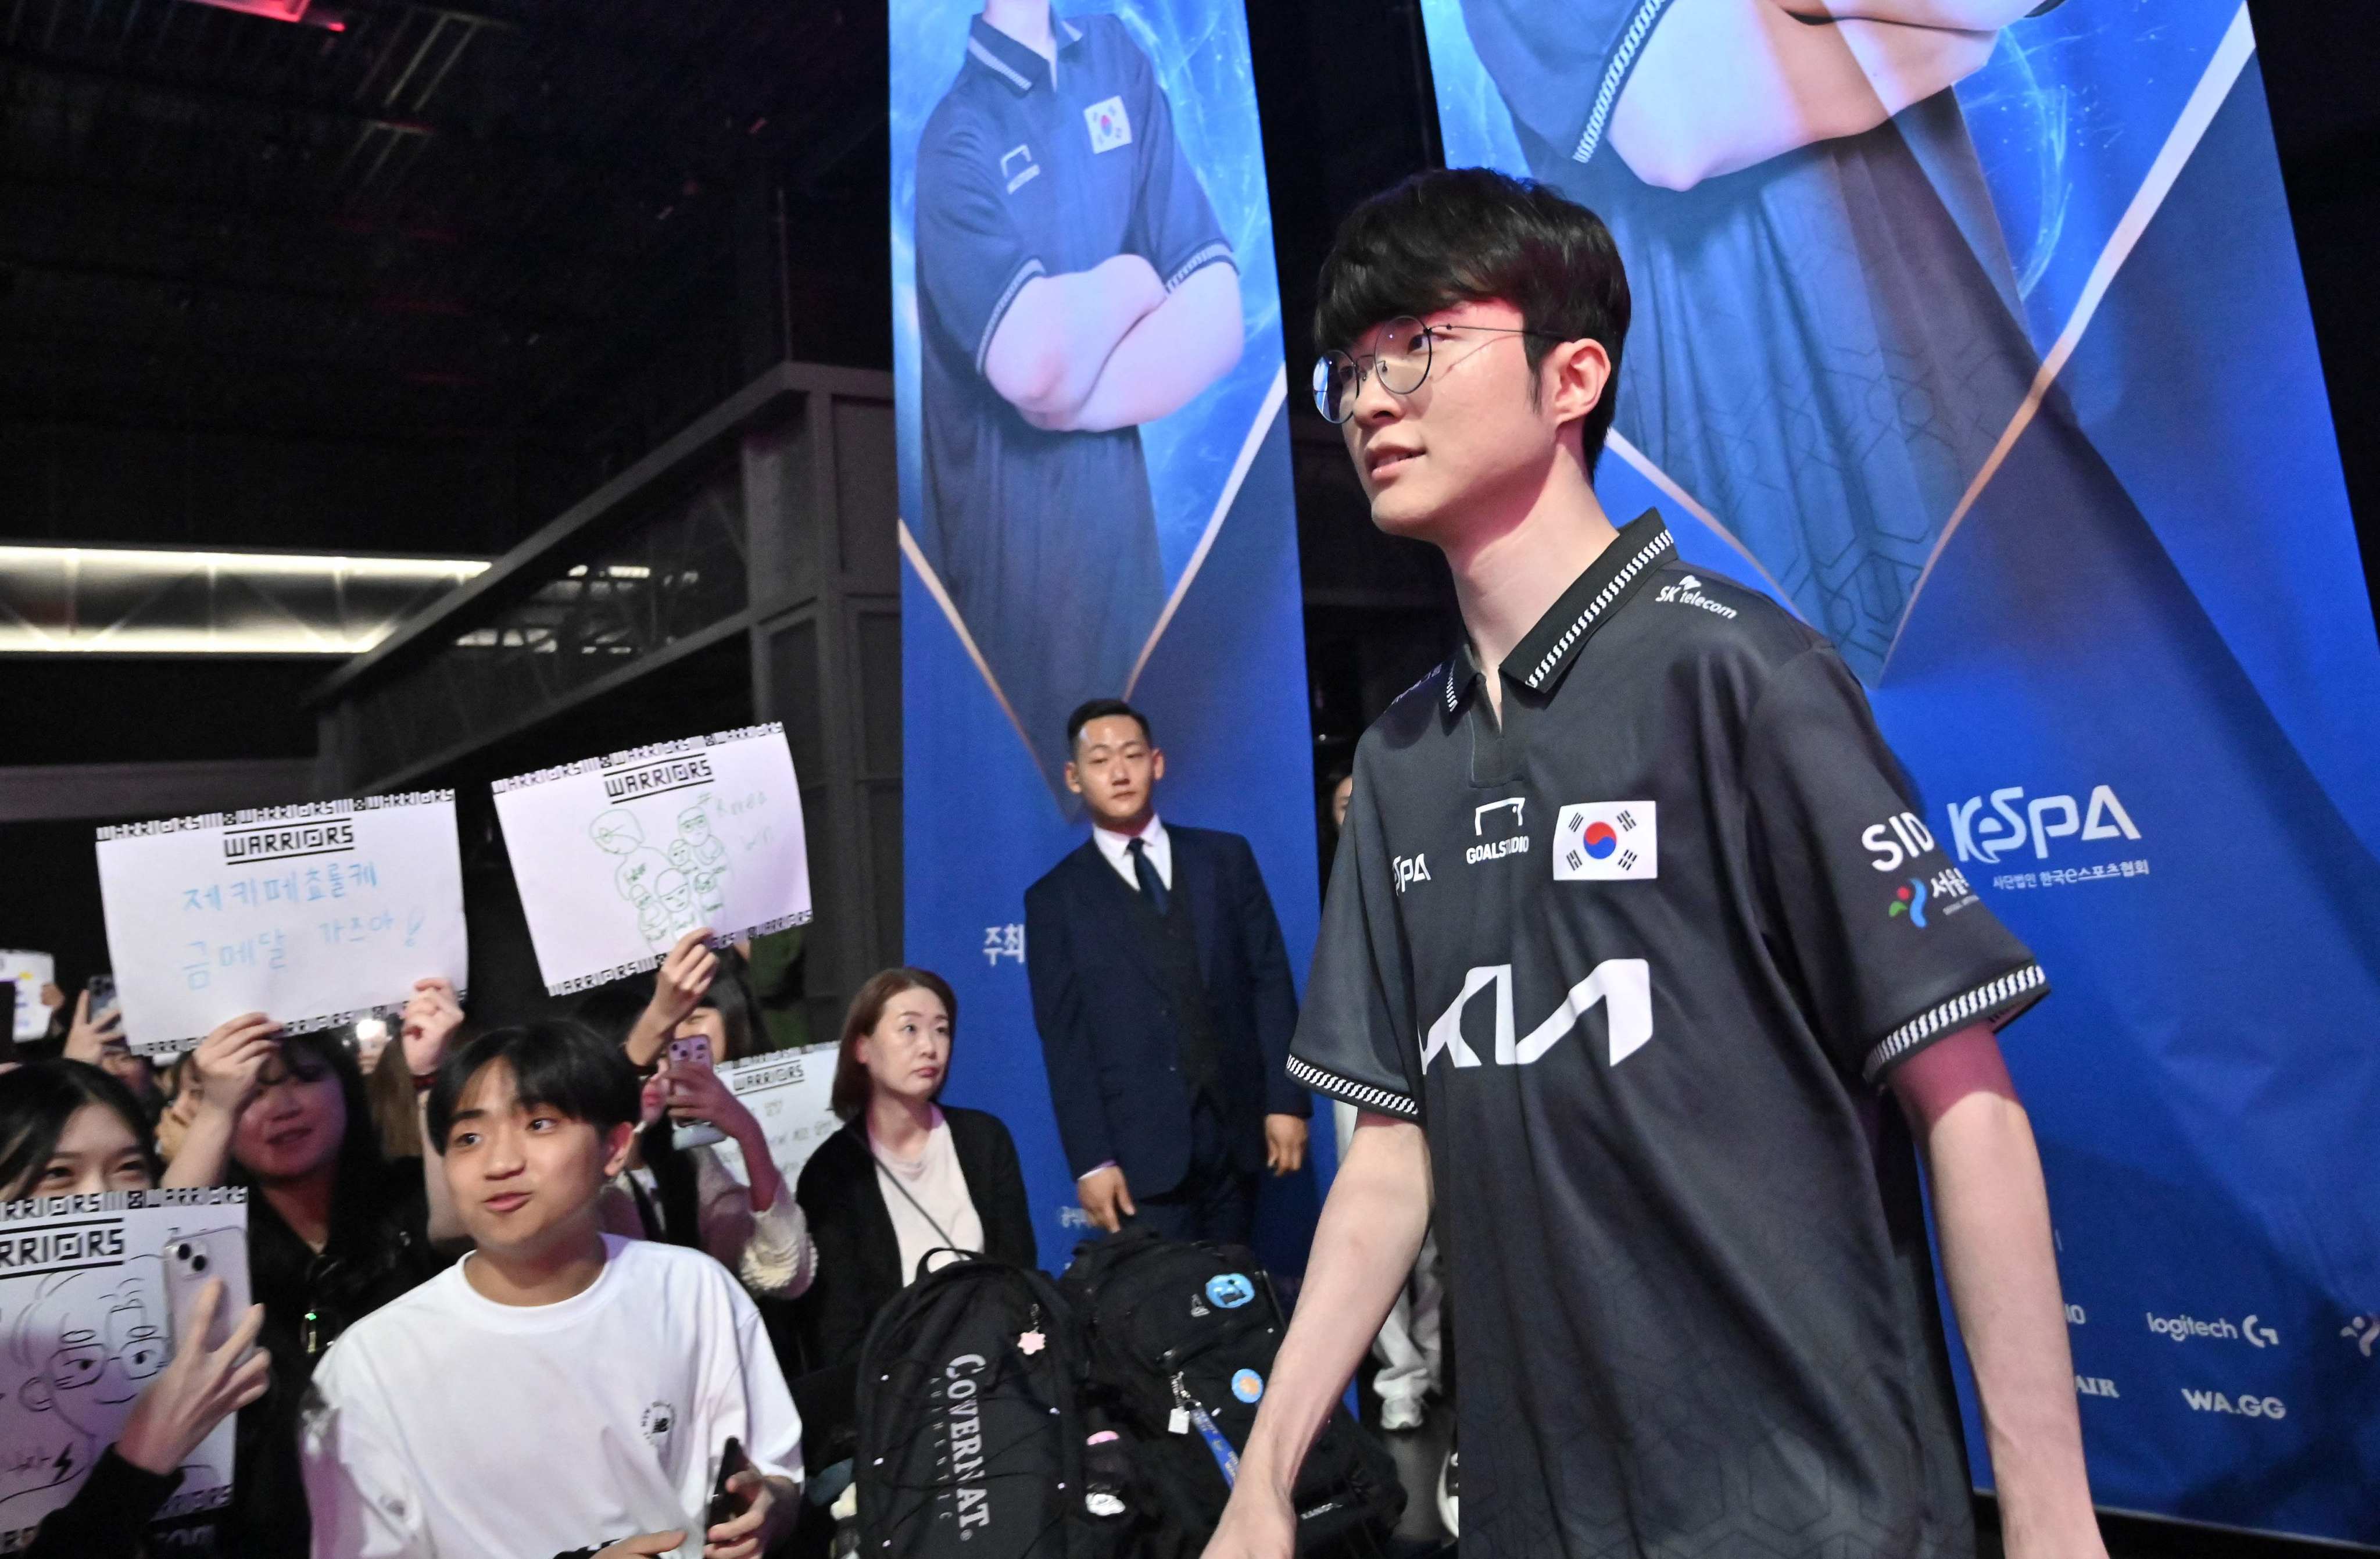 Meet Faker, the 24-year-old who carries an entire sport on his